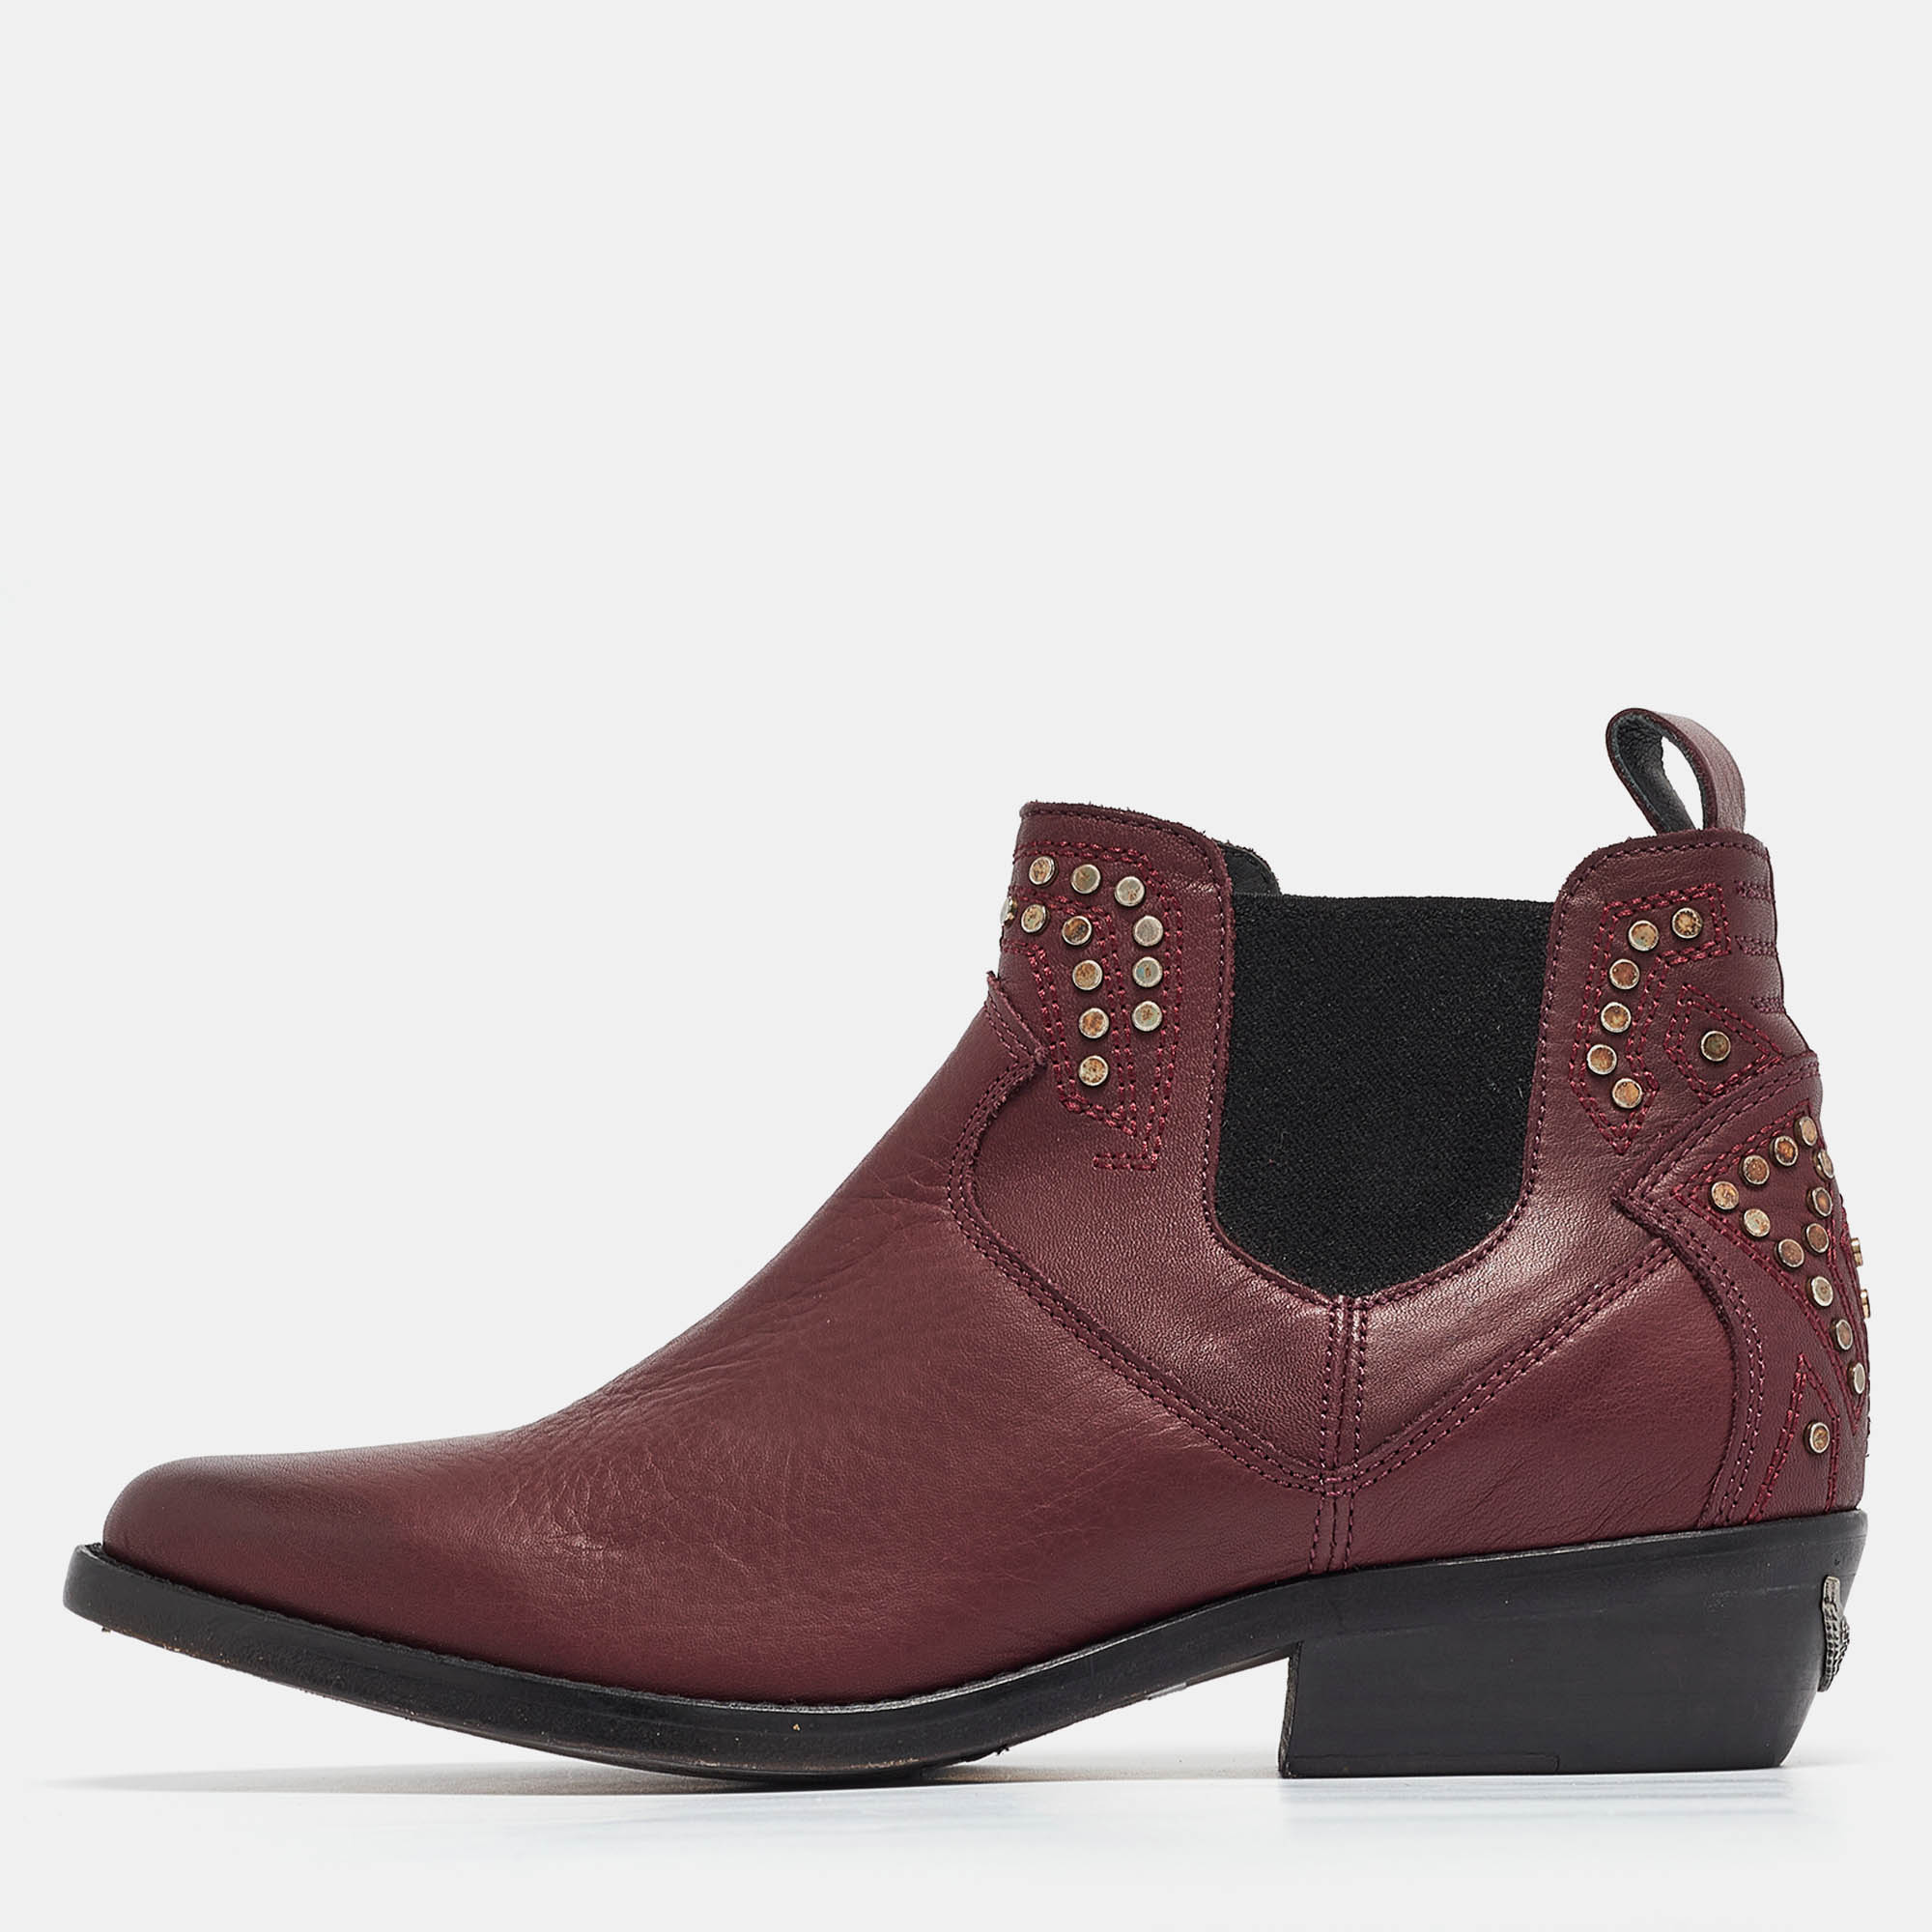 Pre-owned Zadig & Voltaire Burgundy Leather Thylana Studded Ankle Booties Size 37